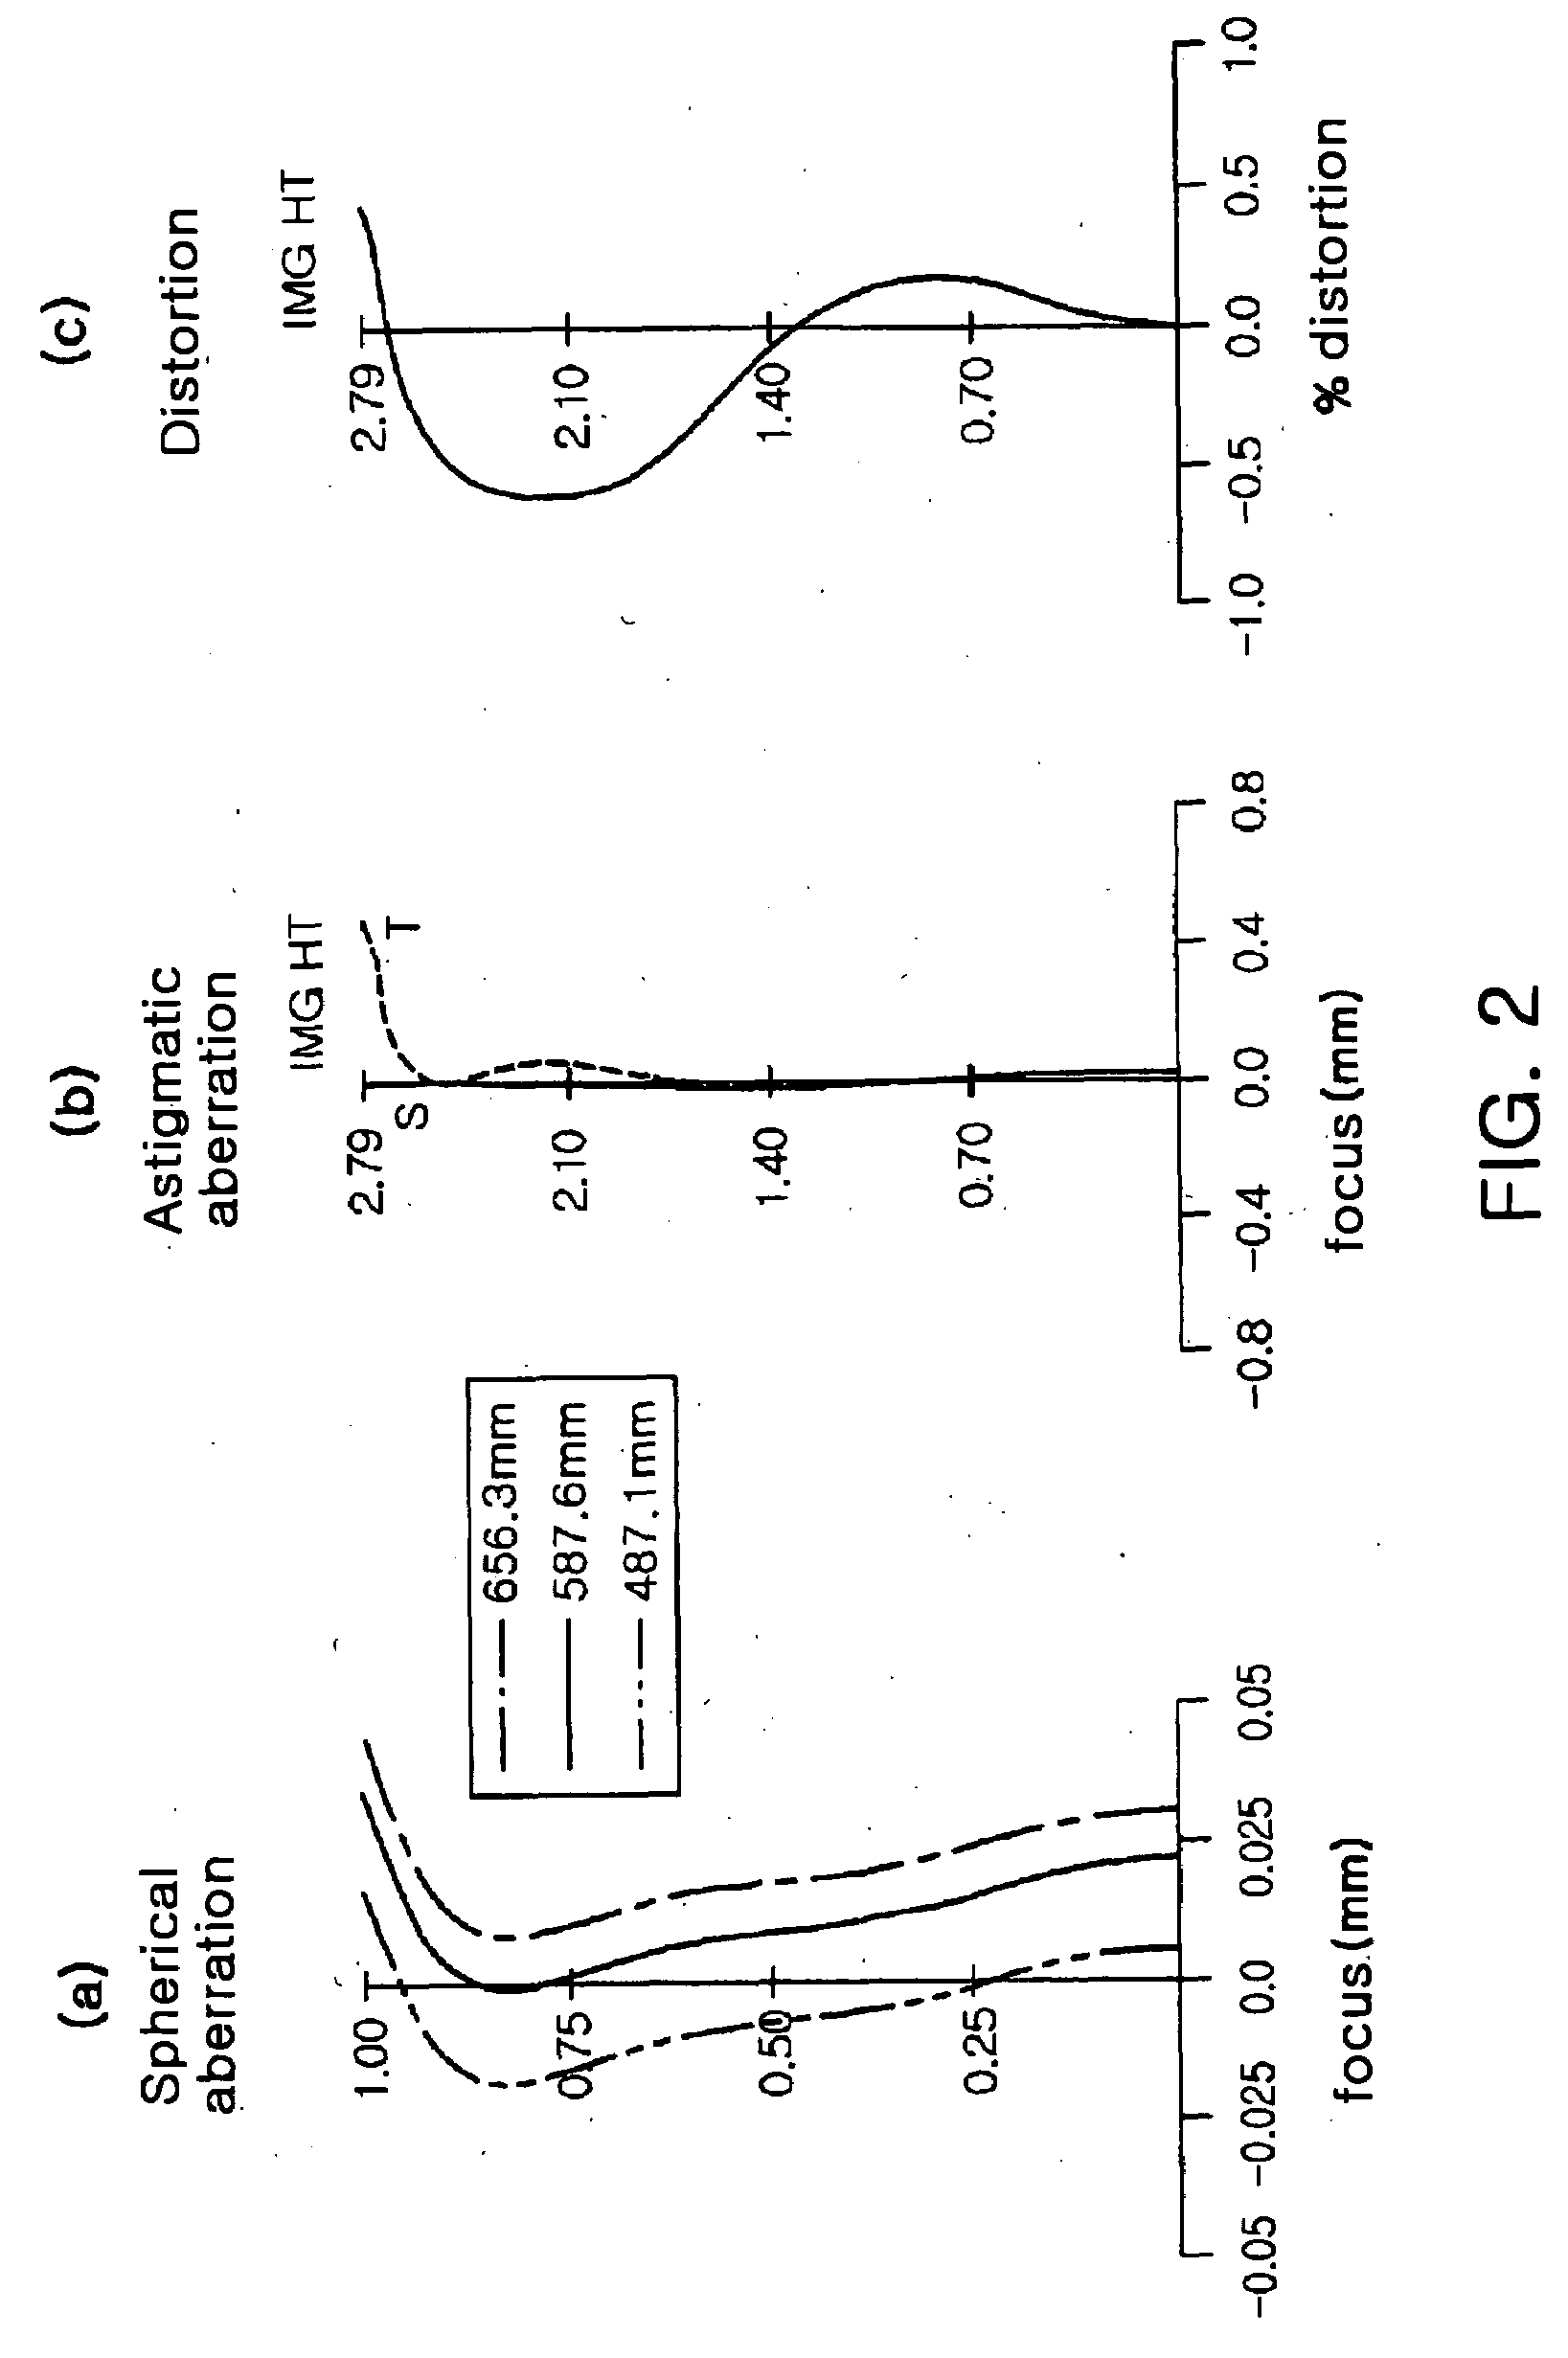 Subminiature optical system